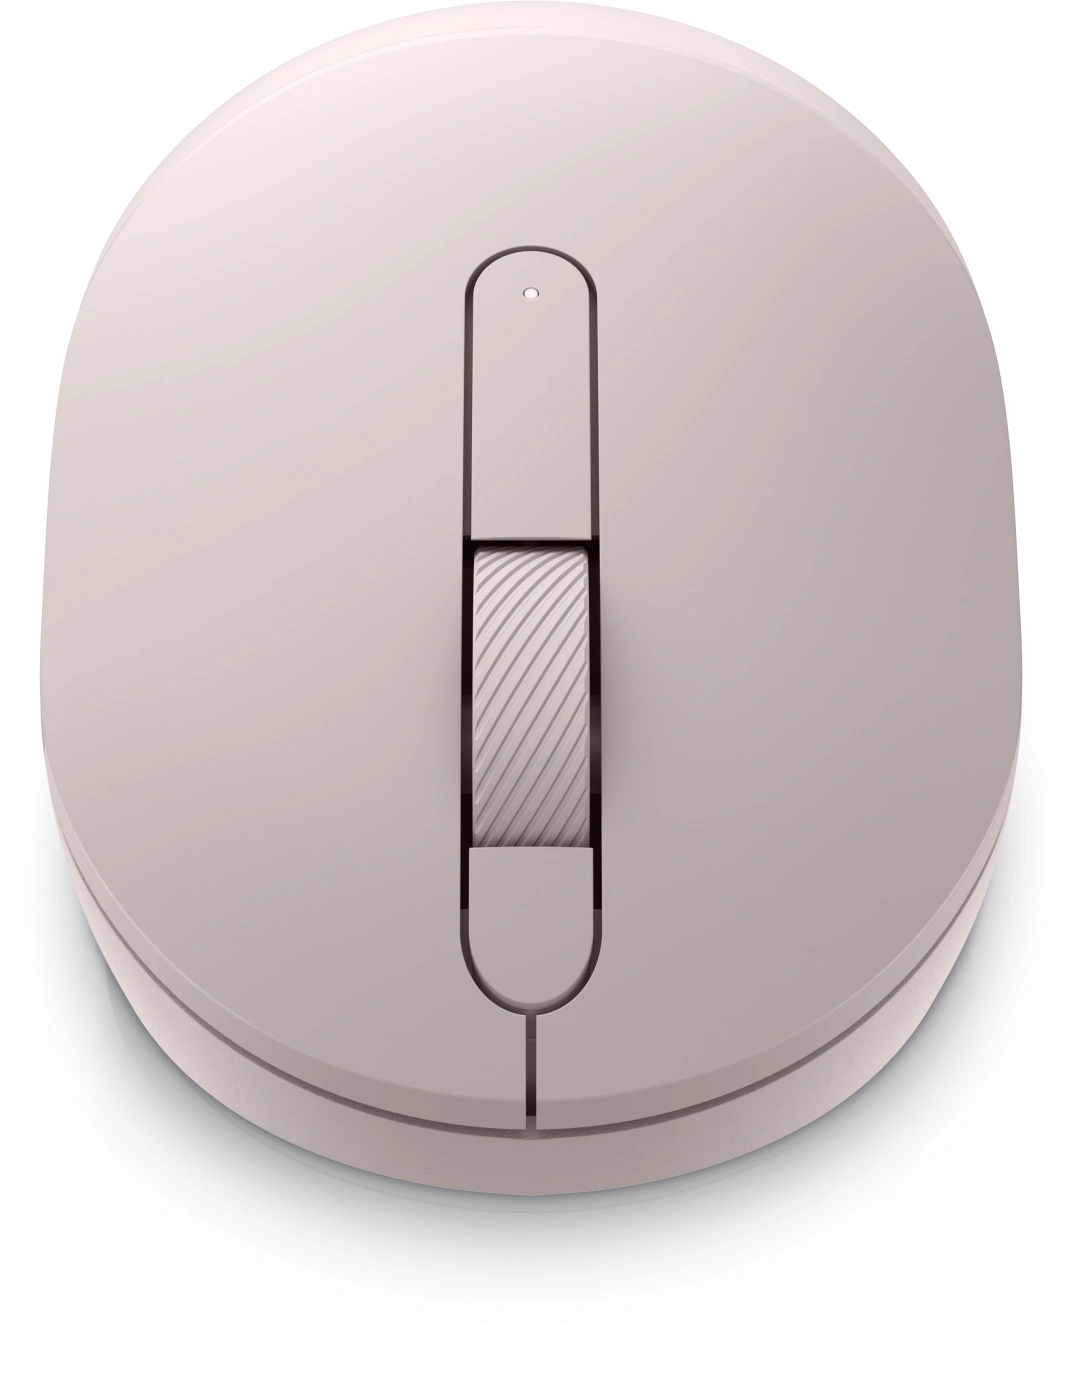 DELL MS3320W Mouse (570-ABPY) Ash Pink